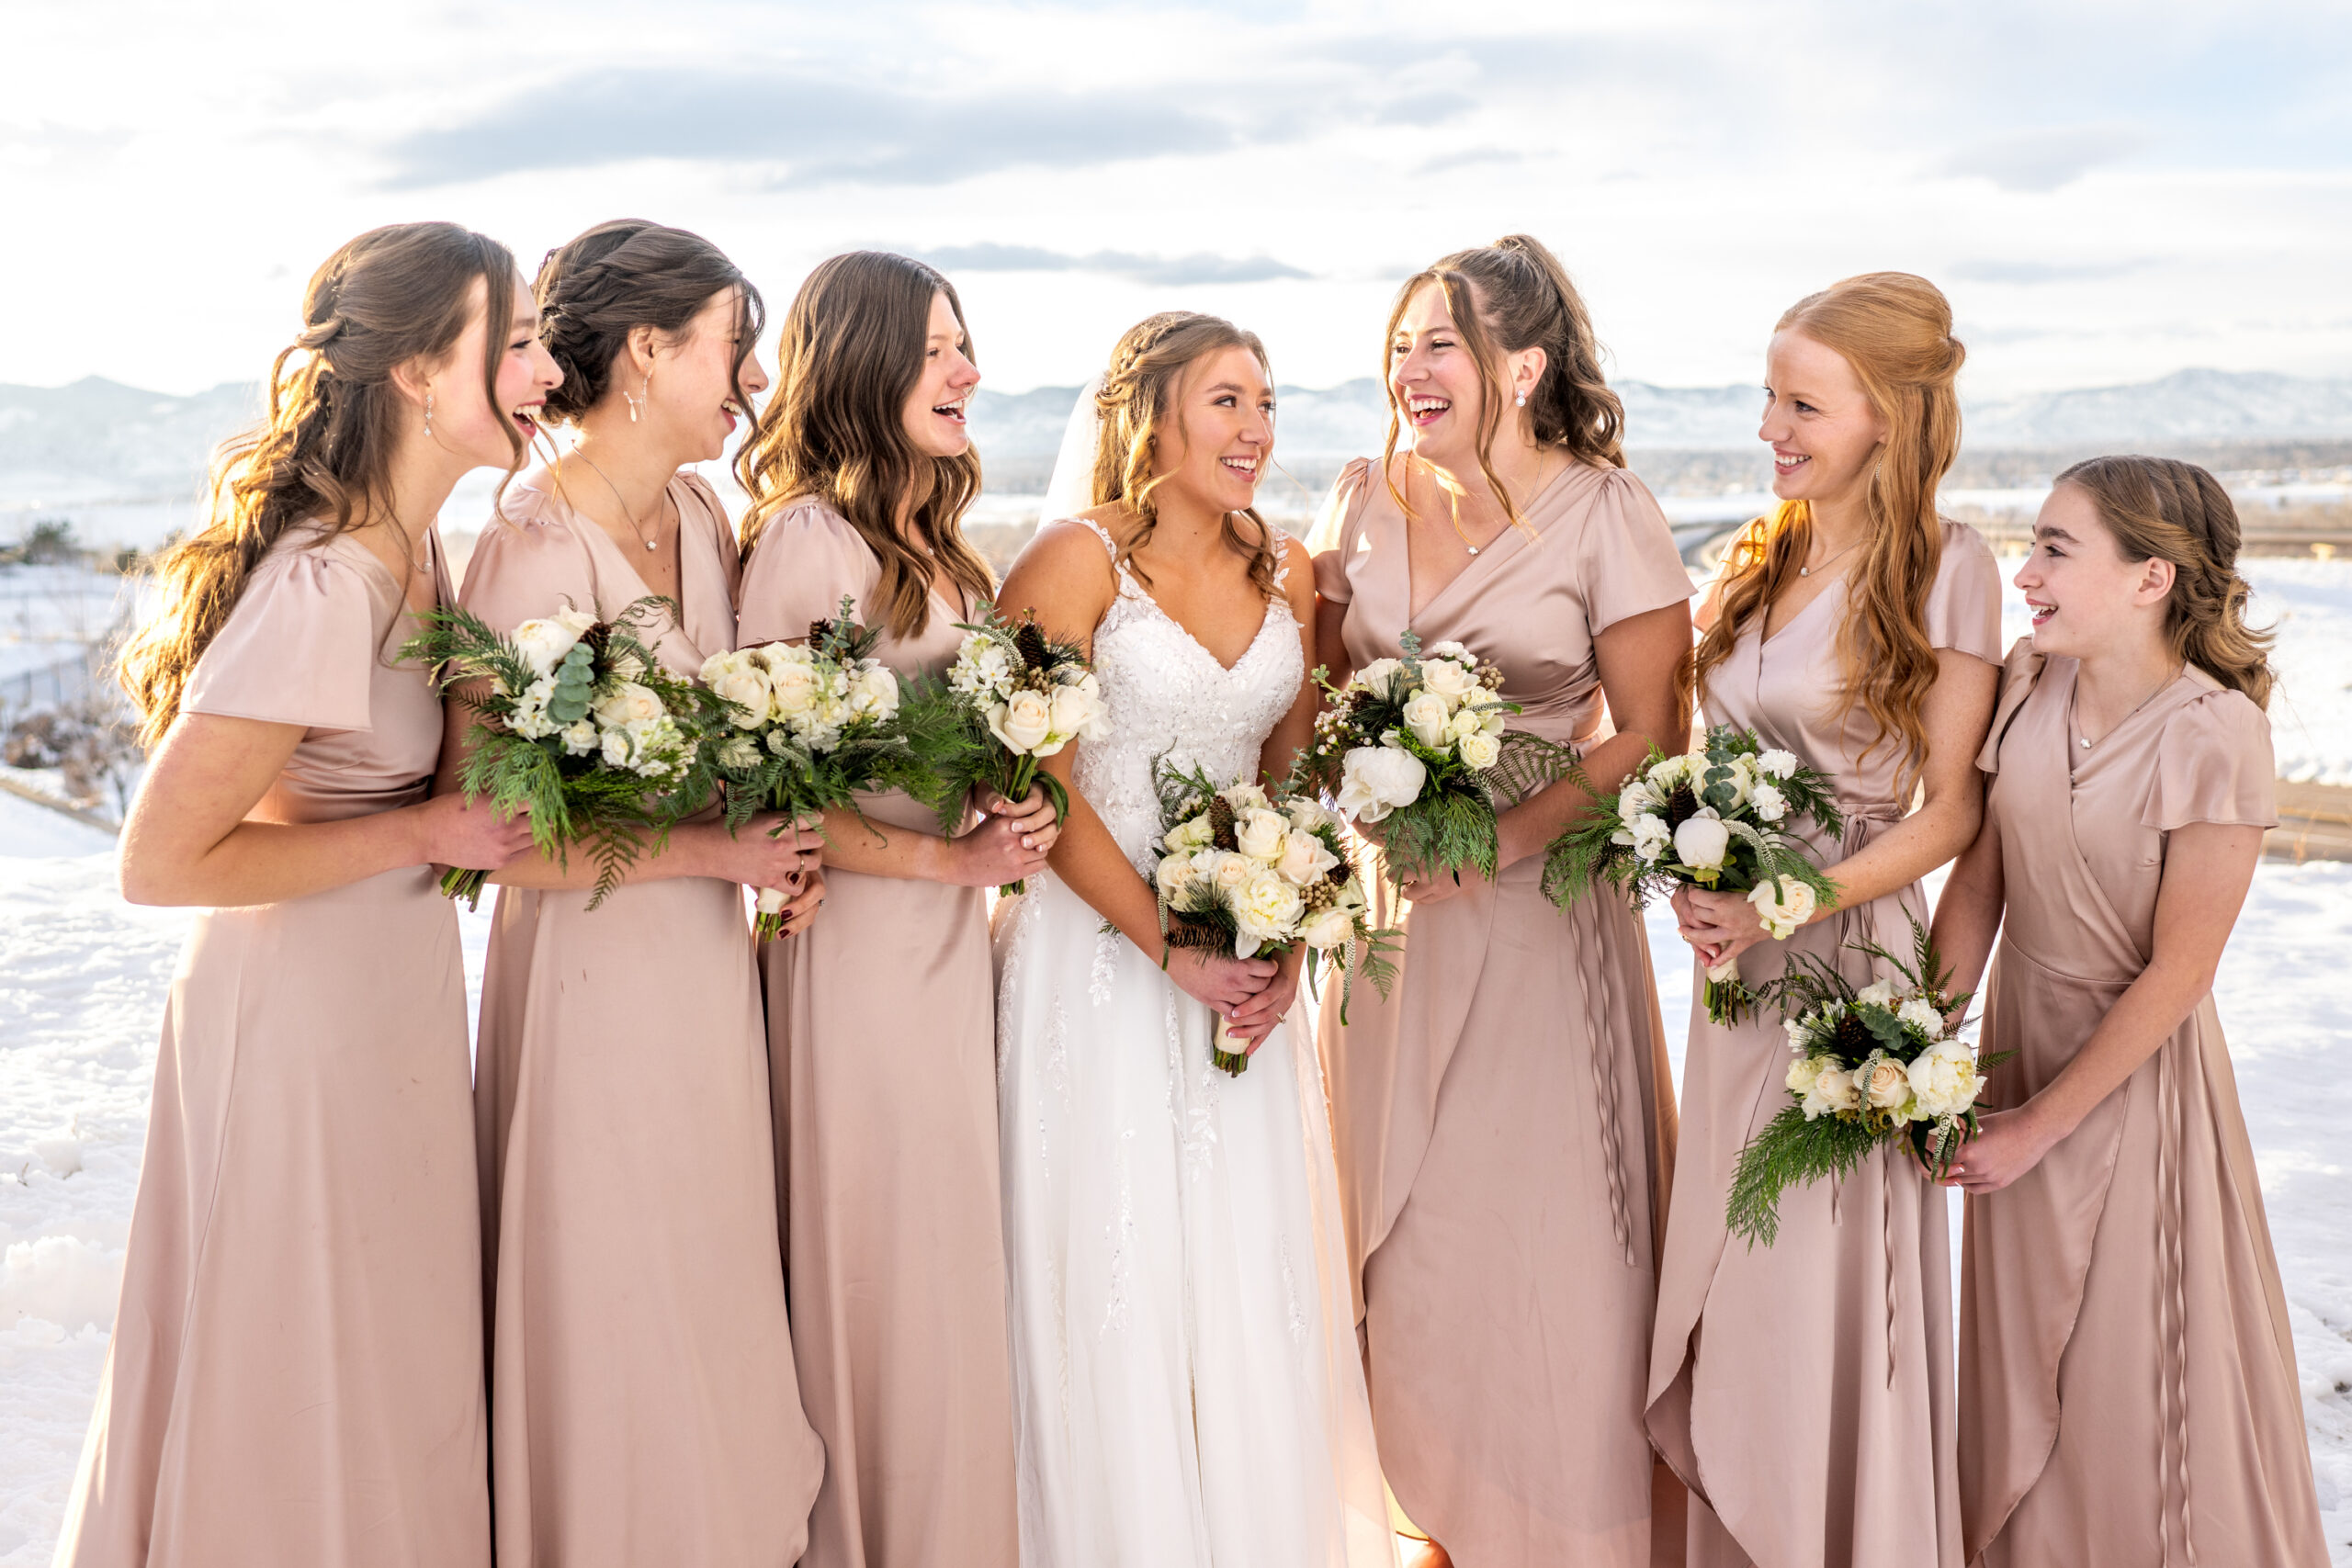 The bride poses with her bridesmaids at Fly'n B Park in Littleton, Colorado, during their wedding at Ashley Ridge by Wedgewood Weddings.